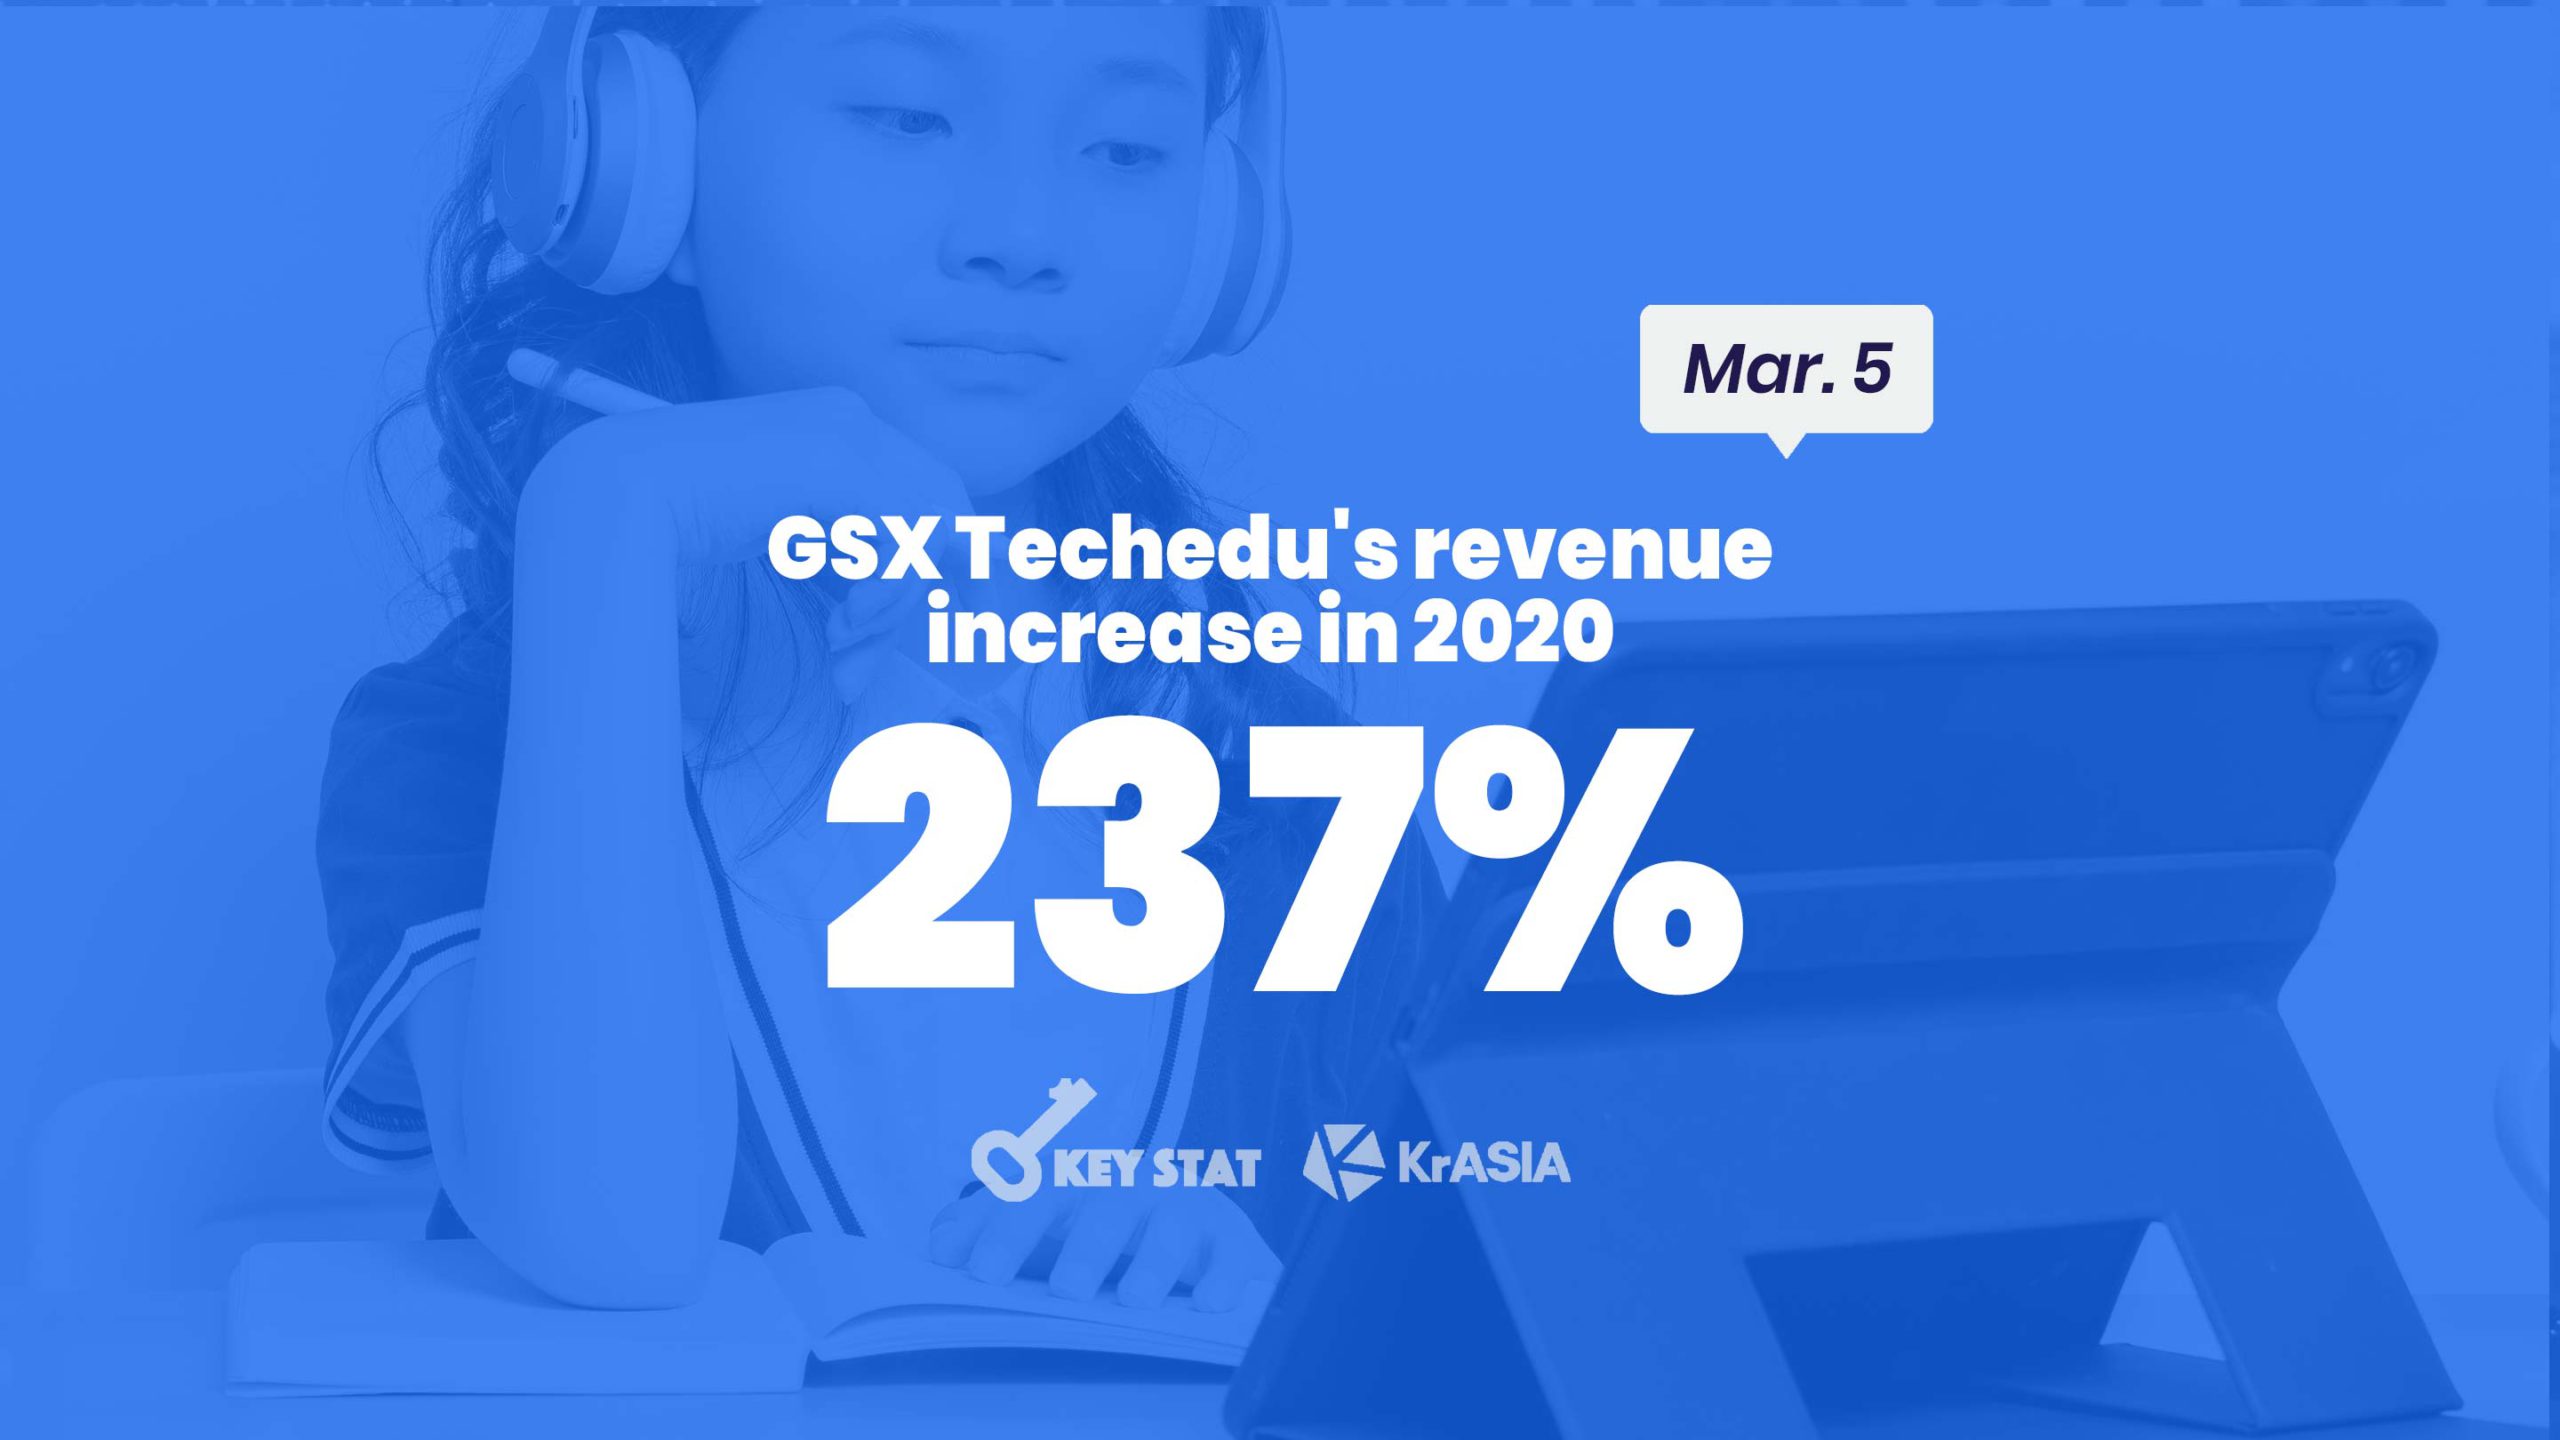 KEY STAT | Edtech firm GSX reports revenue increase as expenses widen